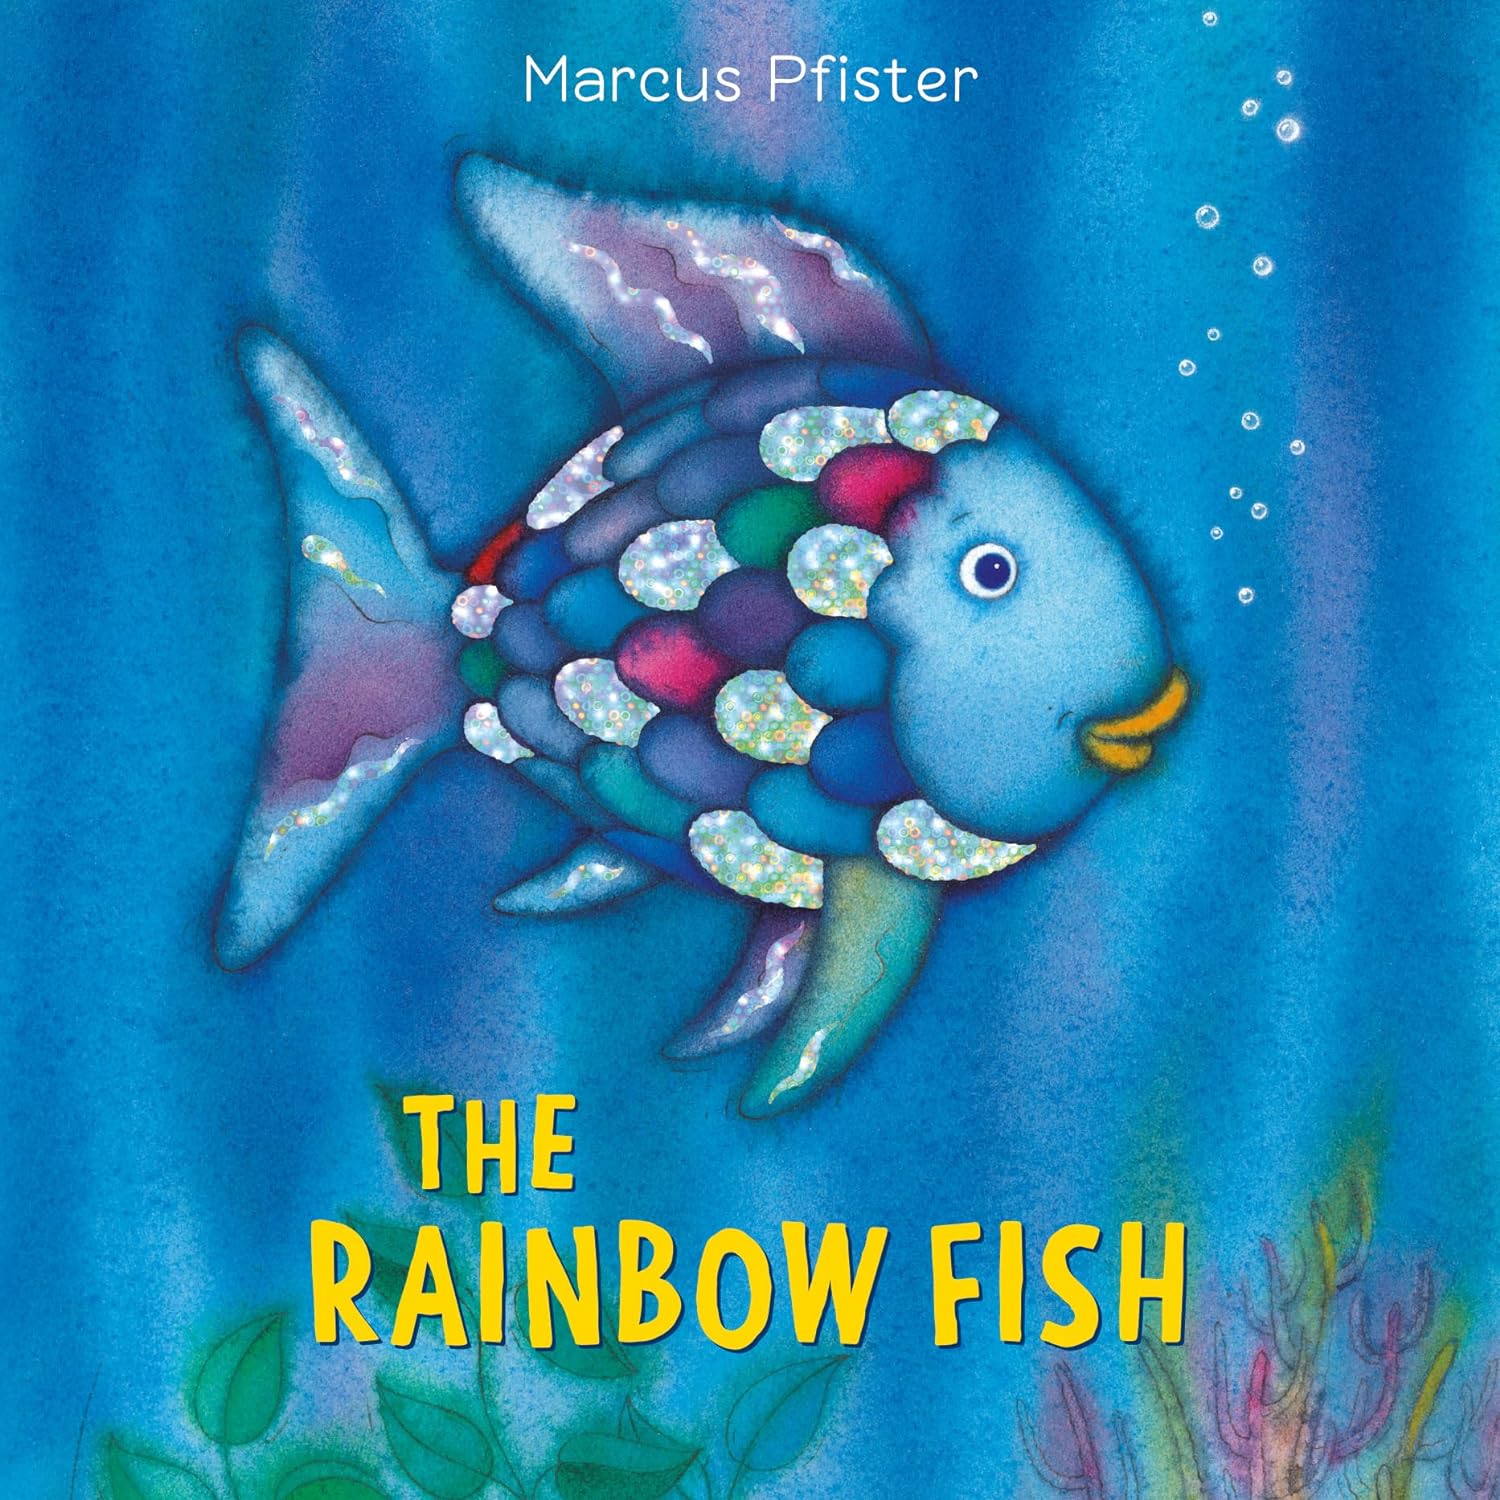 The Rainbow Fish by Marcus Pfister